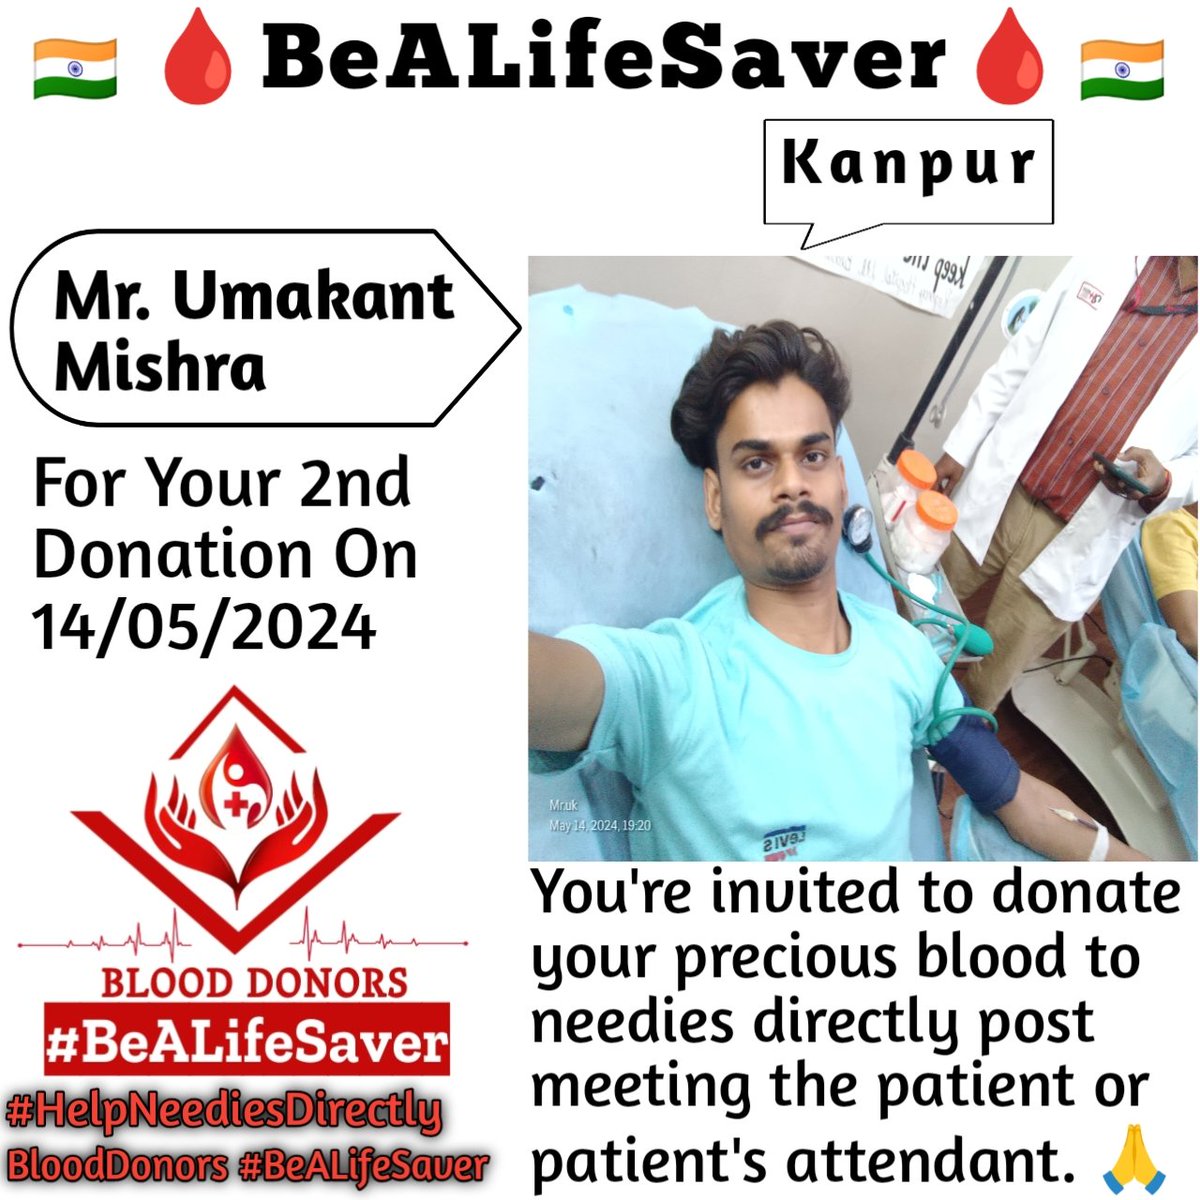 Kanpur BeALifeSaver
Kudos_Mr_Umakant_Mishra_Ji
#HelpNeediesDirectly

Today's hero
Mr. Umakant_Mishra Ji donated blood in Kanpur for the 2nd Time for one of the needies. Heartfelt Gratitude and Respect to Umakant Mishra Ji for his blood donation for Patient admitted in Kanpur.